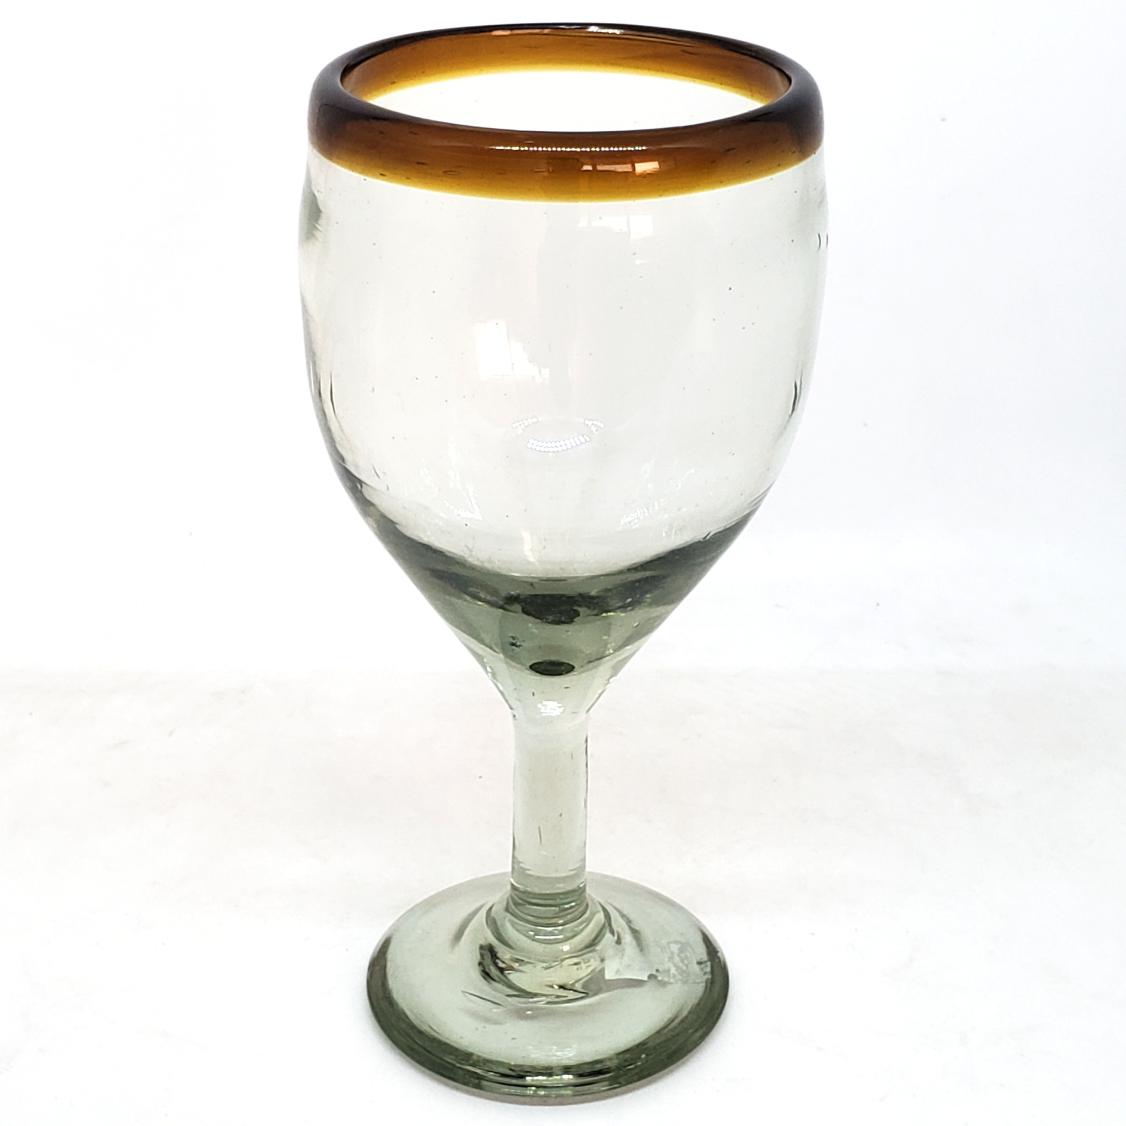 Colored Rim Glassware / Amber Rim 13 oz Wine Glasses (set of 6) / Capture the bouquet of fine red wine with these wine glasses bordered with a bright, amber rim.